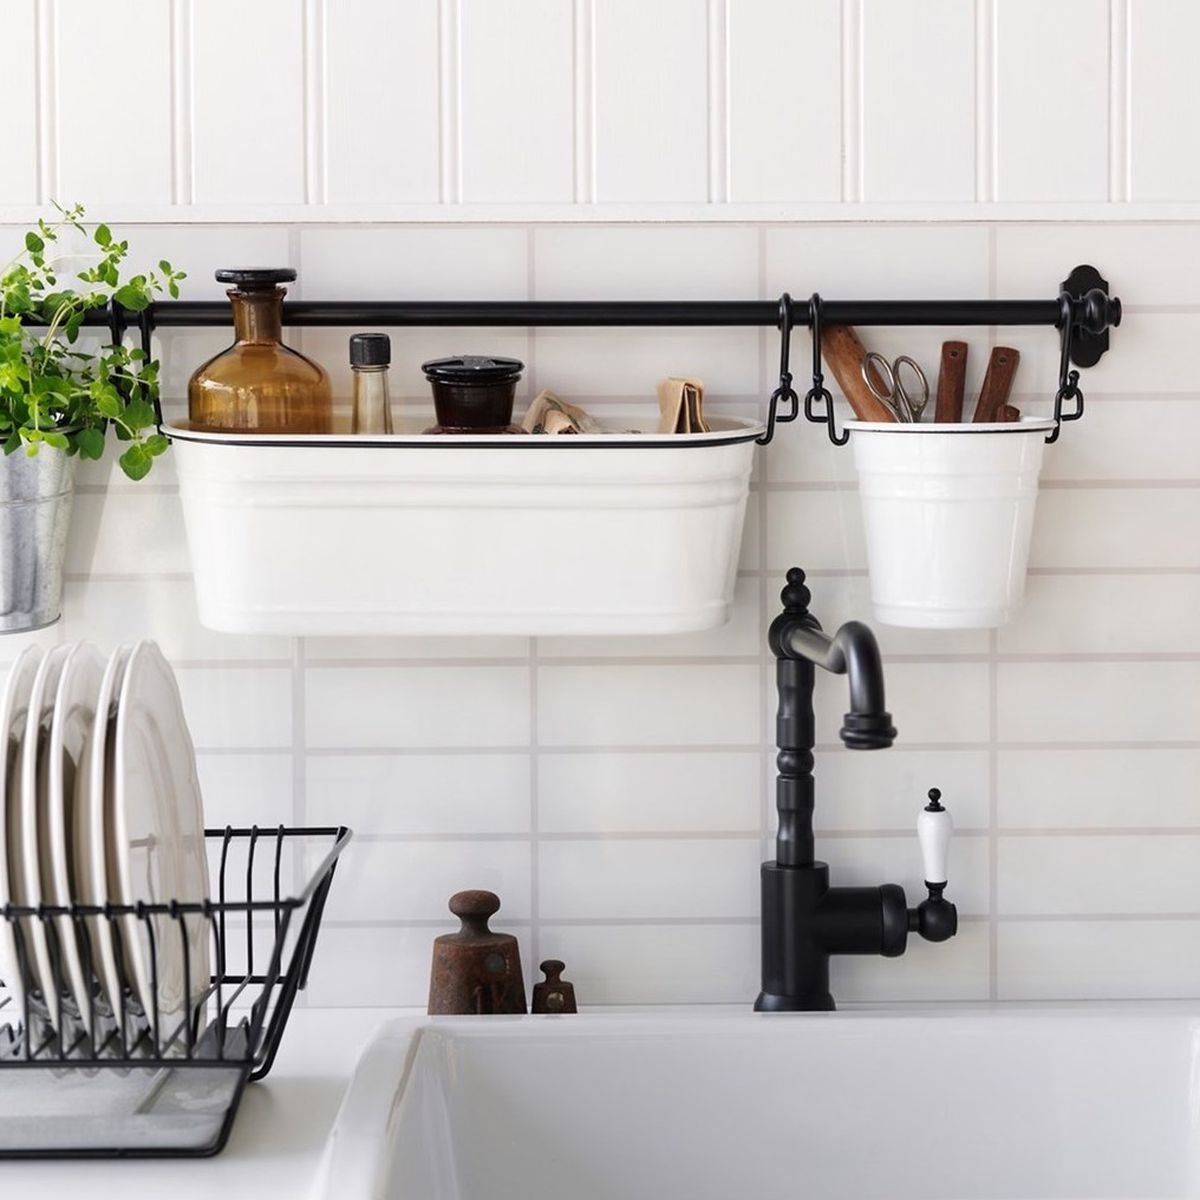 A kitchen has a deep white farmhouse sink, white dishes drying in a black rack, and white buckets hanging from a black bar behind the sink.